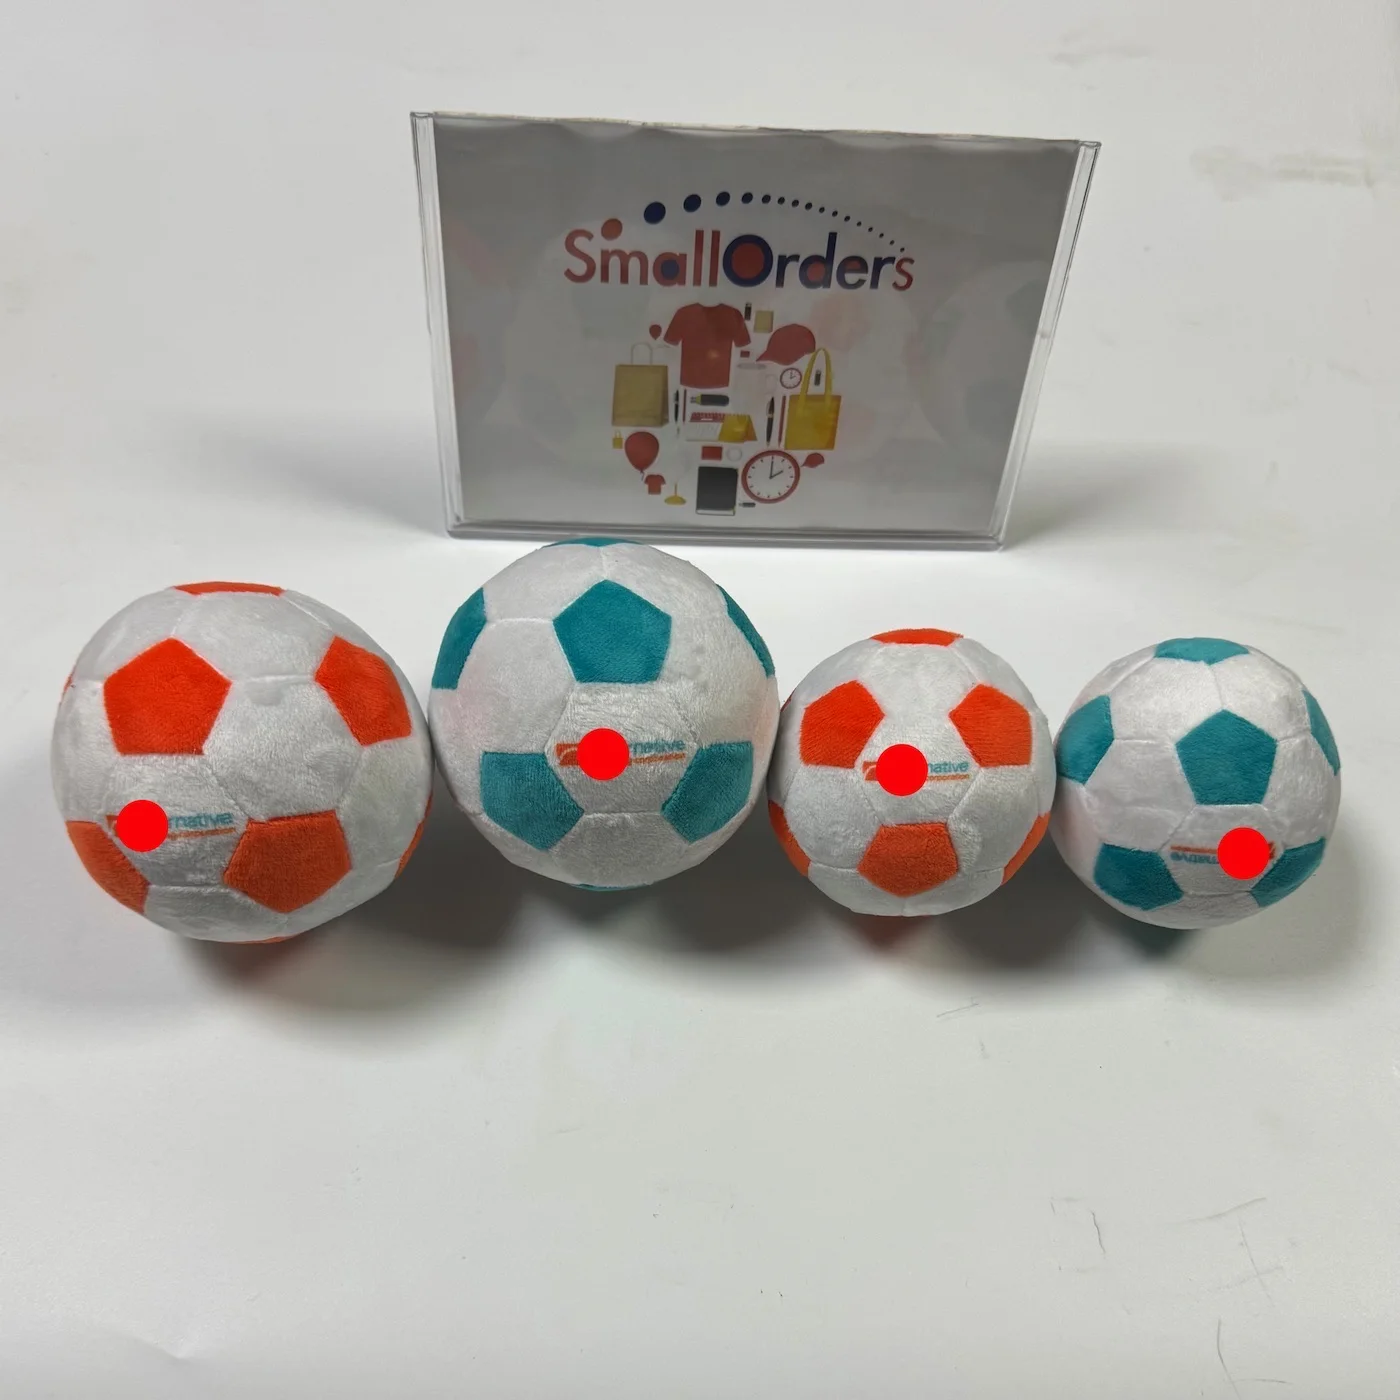 Wholesale Custom Stuffed Soccer Football Toy Soft Baby Toy made of Silicone PVC for Kids Educational Promotional Plush Ball Toy